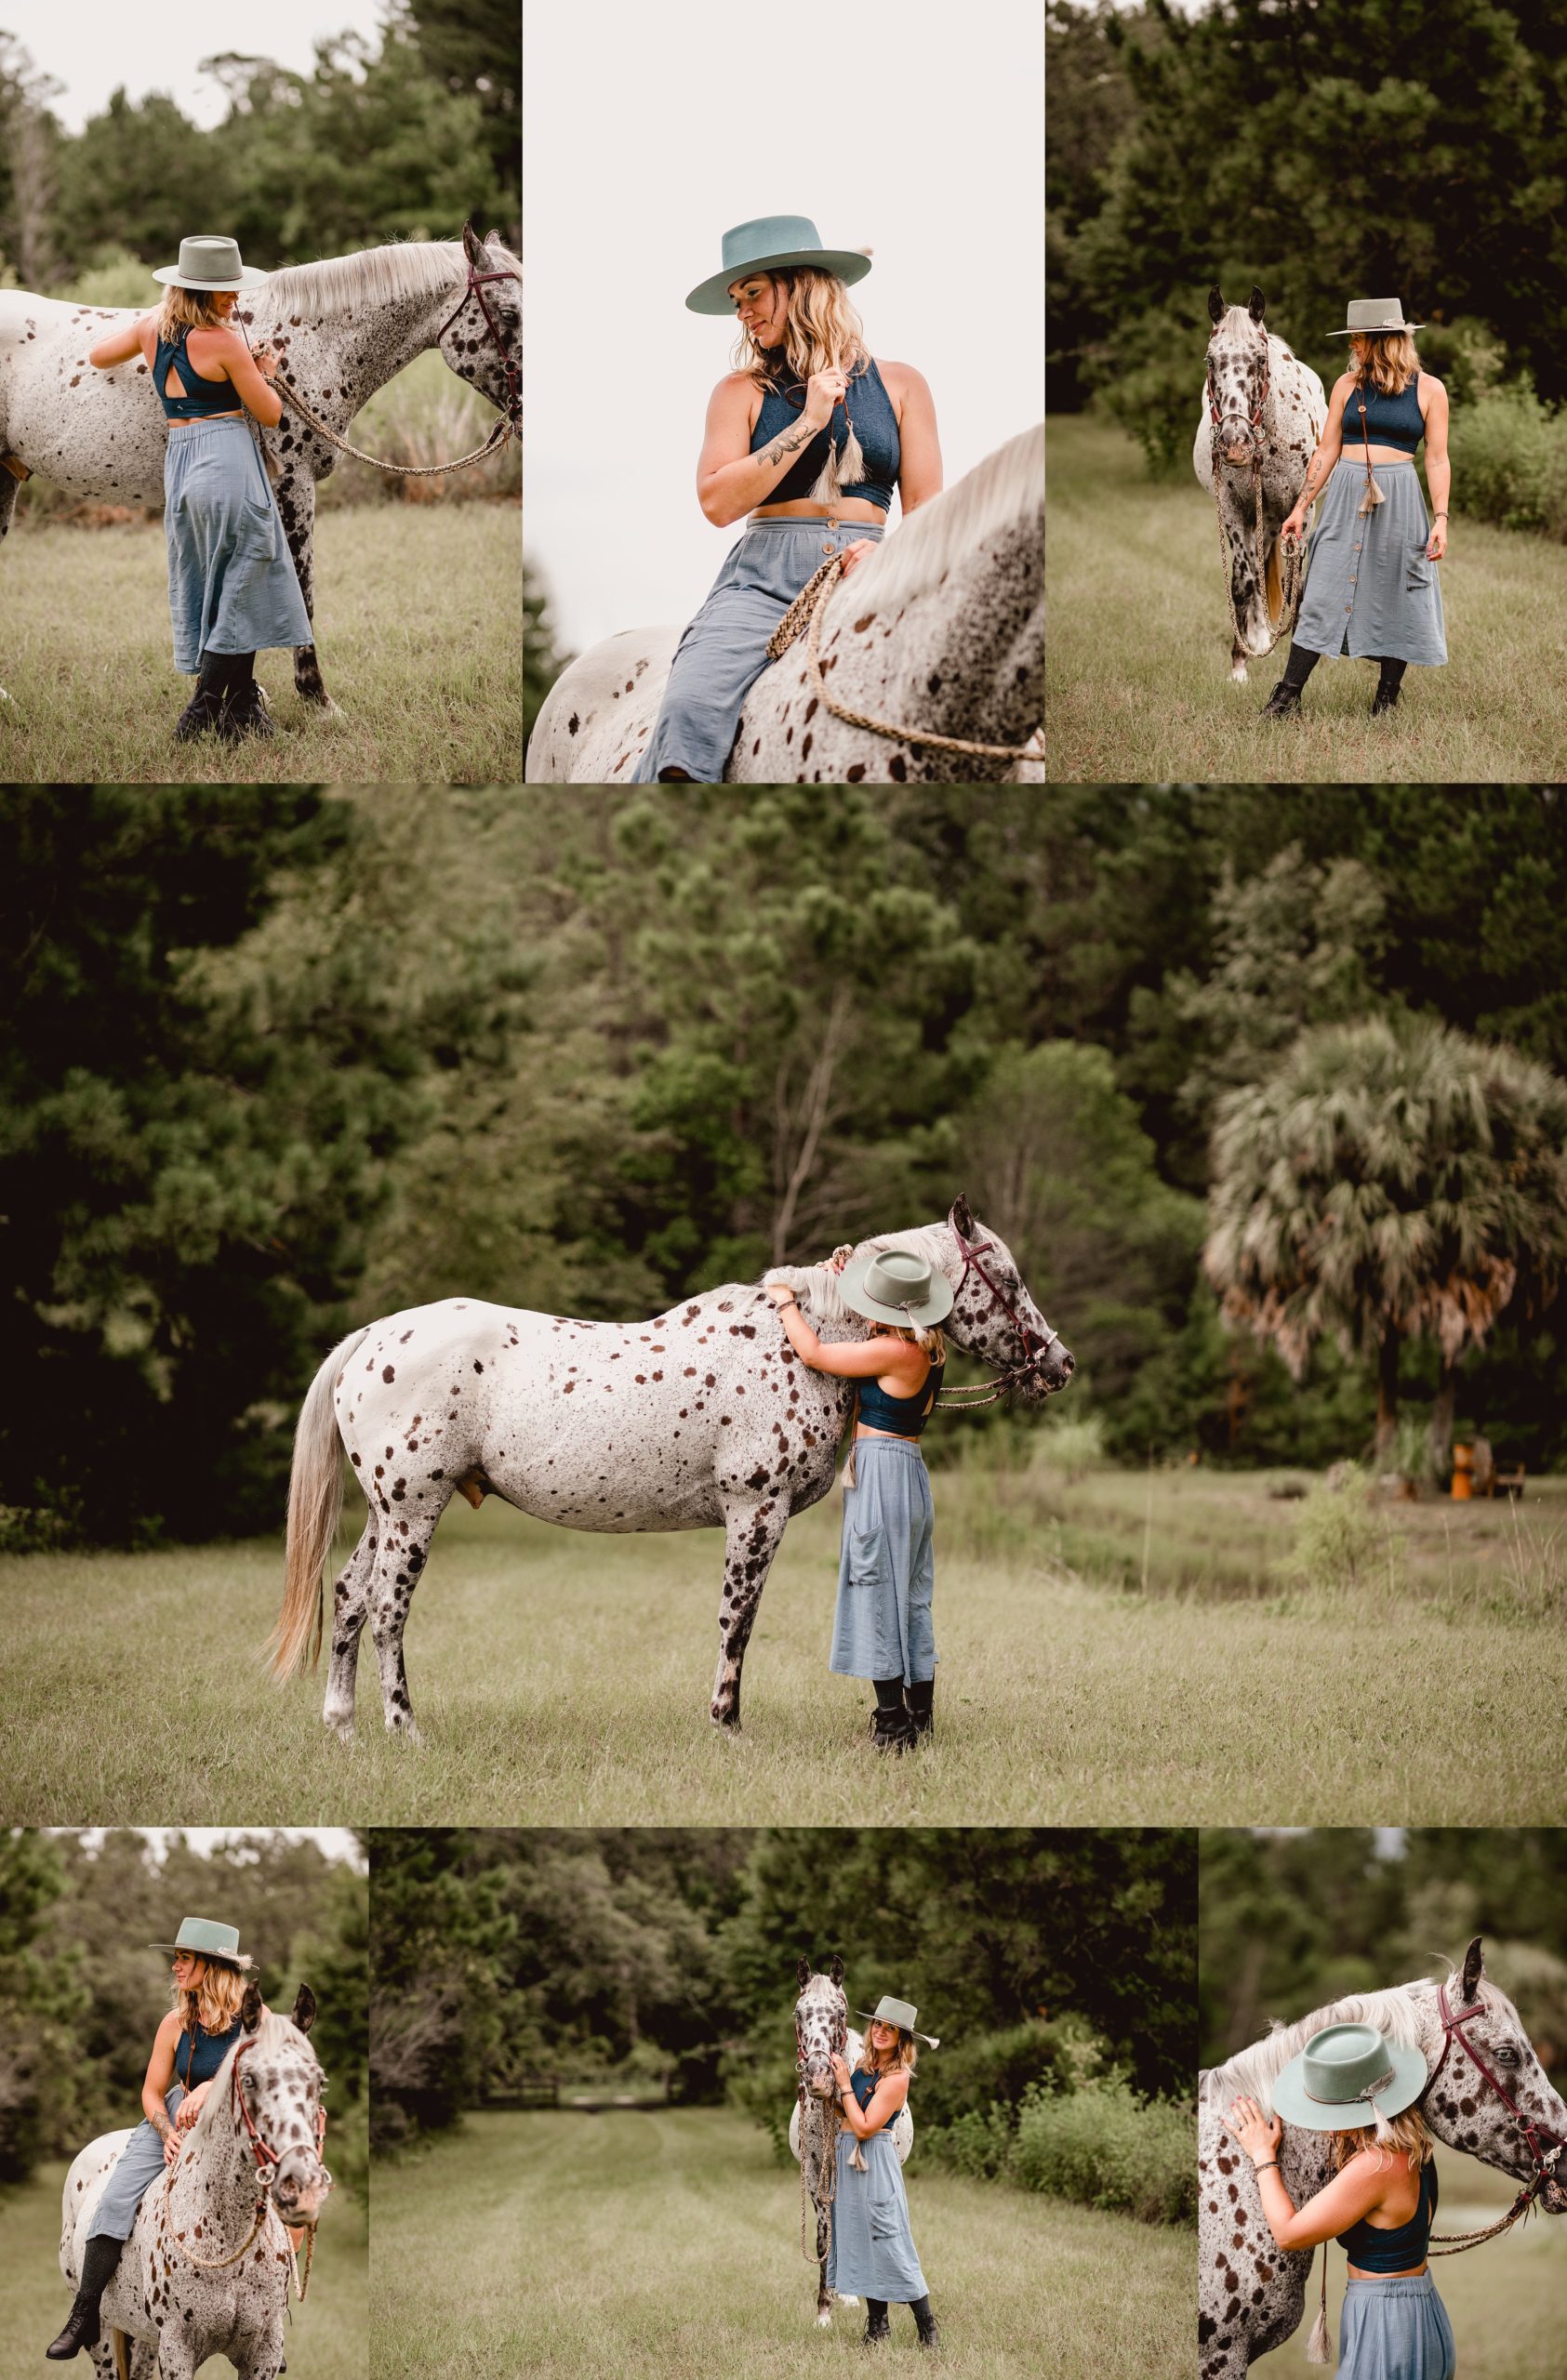 Leopard appaloosa gelding and his person take photos together in rural Gainesville, FL.